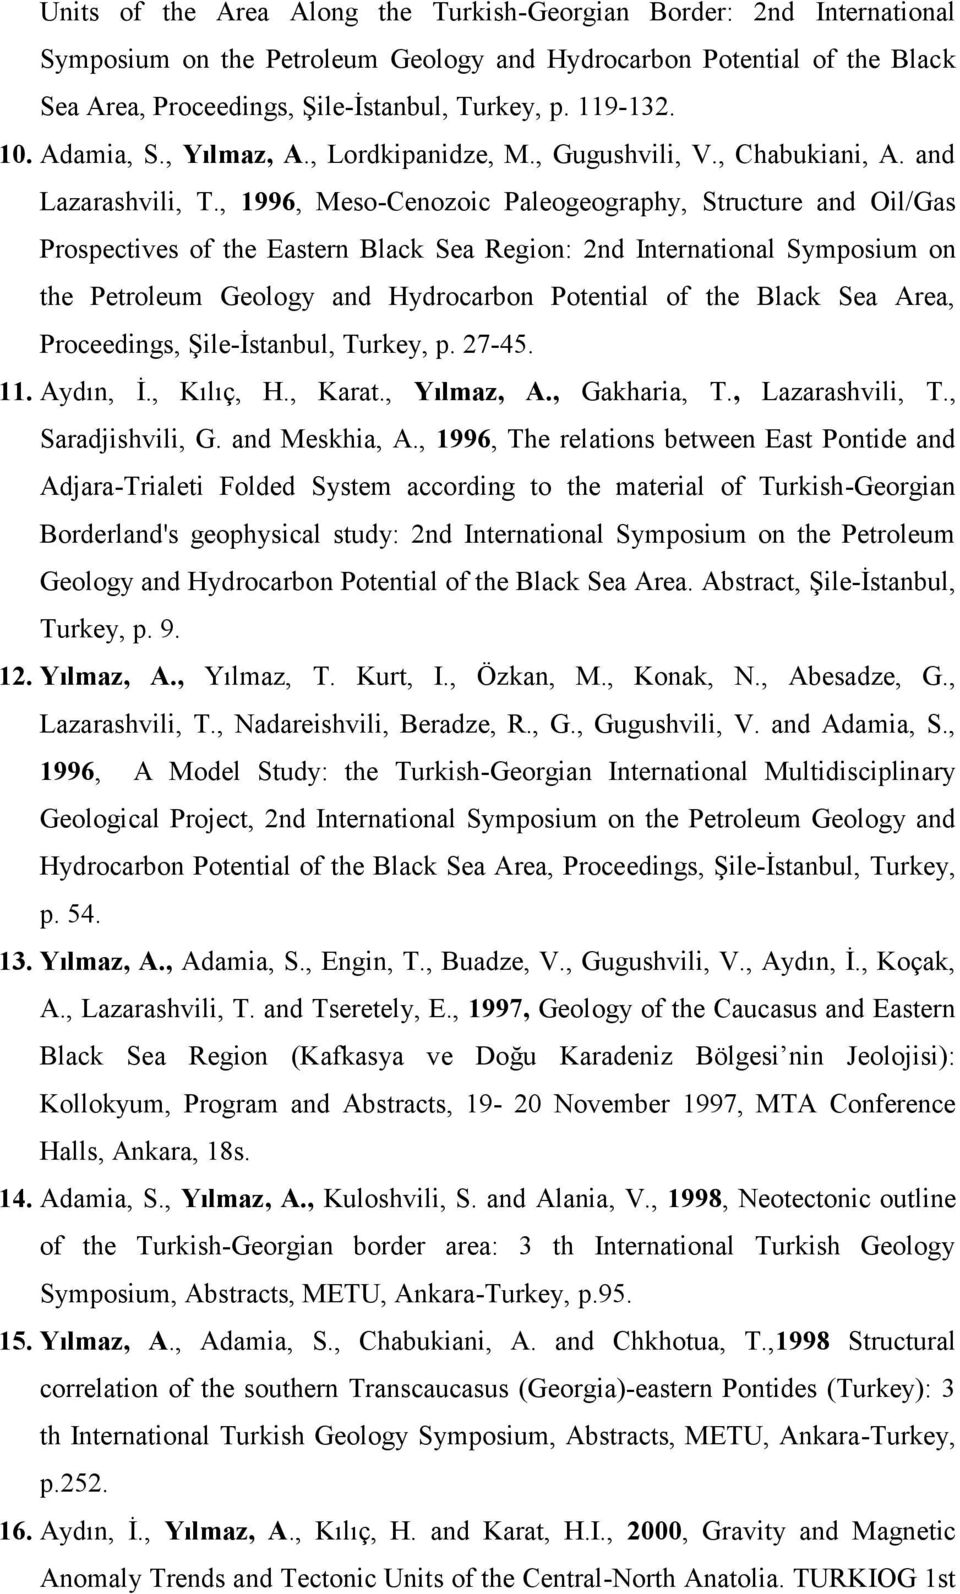 , 1996, Meso-Cenozoic Paleogeography, Structure and Oil/Gas Prospectives of the Eastern Black Sea Region: 2nd International Symposium on the Petroleum Geology and Hydrocarbon Potential of the Black